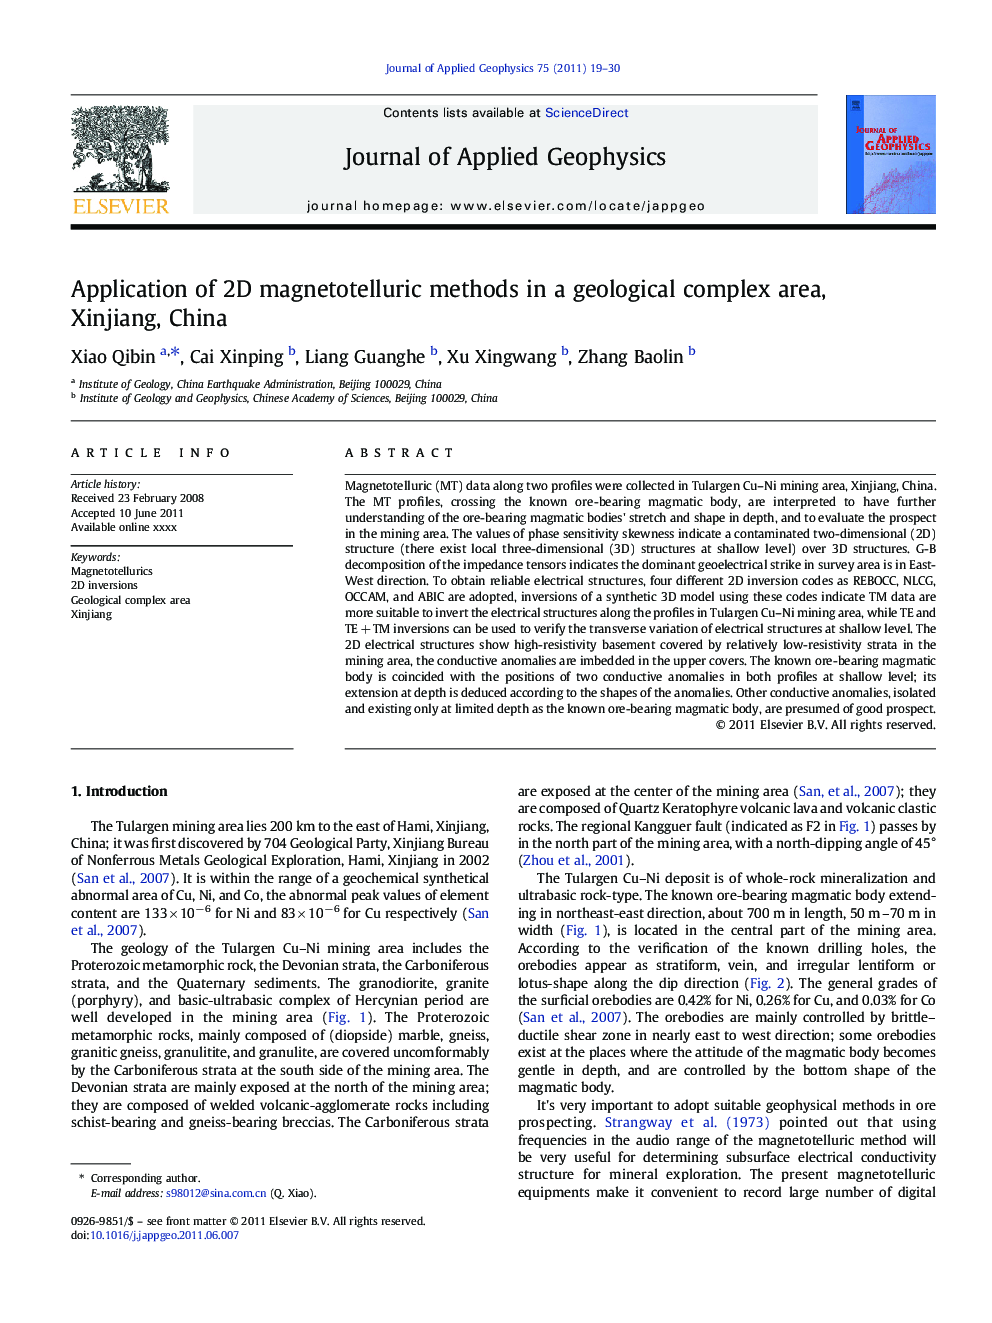 Application of 2D magnetotelluric methods in a geological complex area, Xinjiang, China